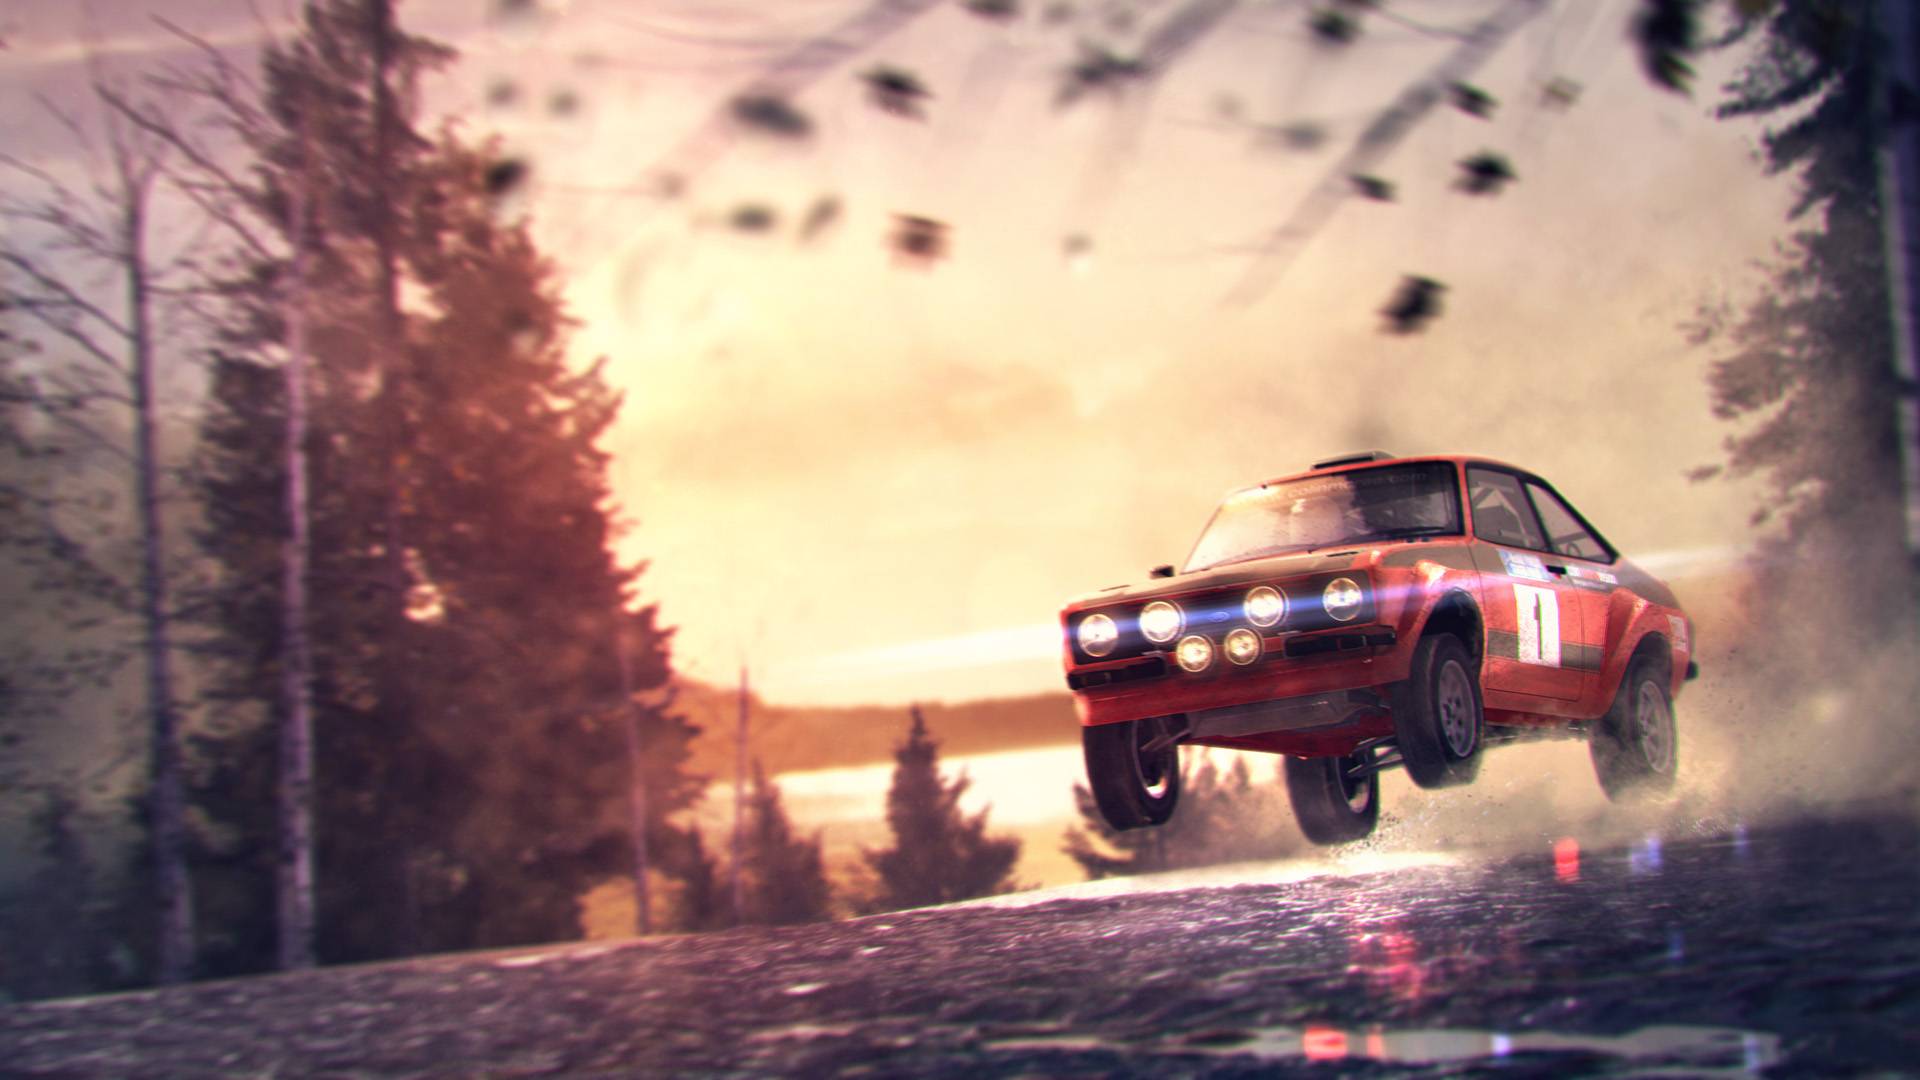 10 DiRT 3 HD Wallpapers and Backgrounds